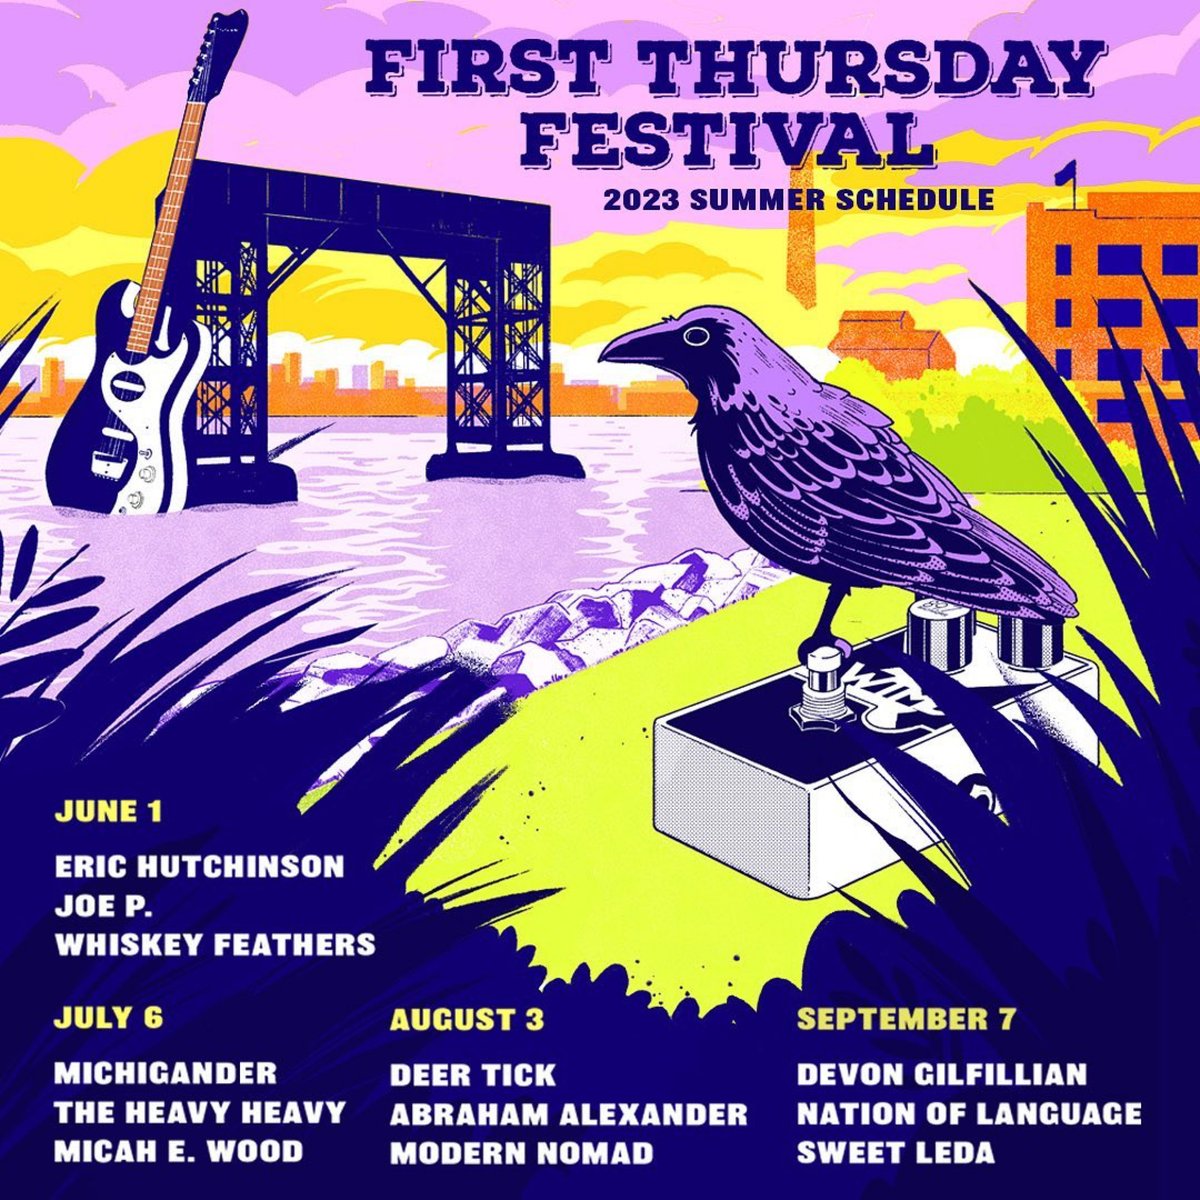 Who are you looking forward to seeing #wtmdradio's #firstthursday festival? July 6 line-up: @michiganderband @theheavyheavy @MicahElie 
#wtmdfirstthursdays #firstthursdays #cantonwaterfrontpark #baltimoremusic #marylandconcerts #canton #baltimore #charmcity #bmore #mybmore